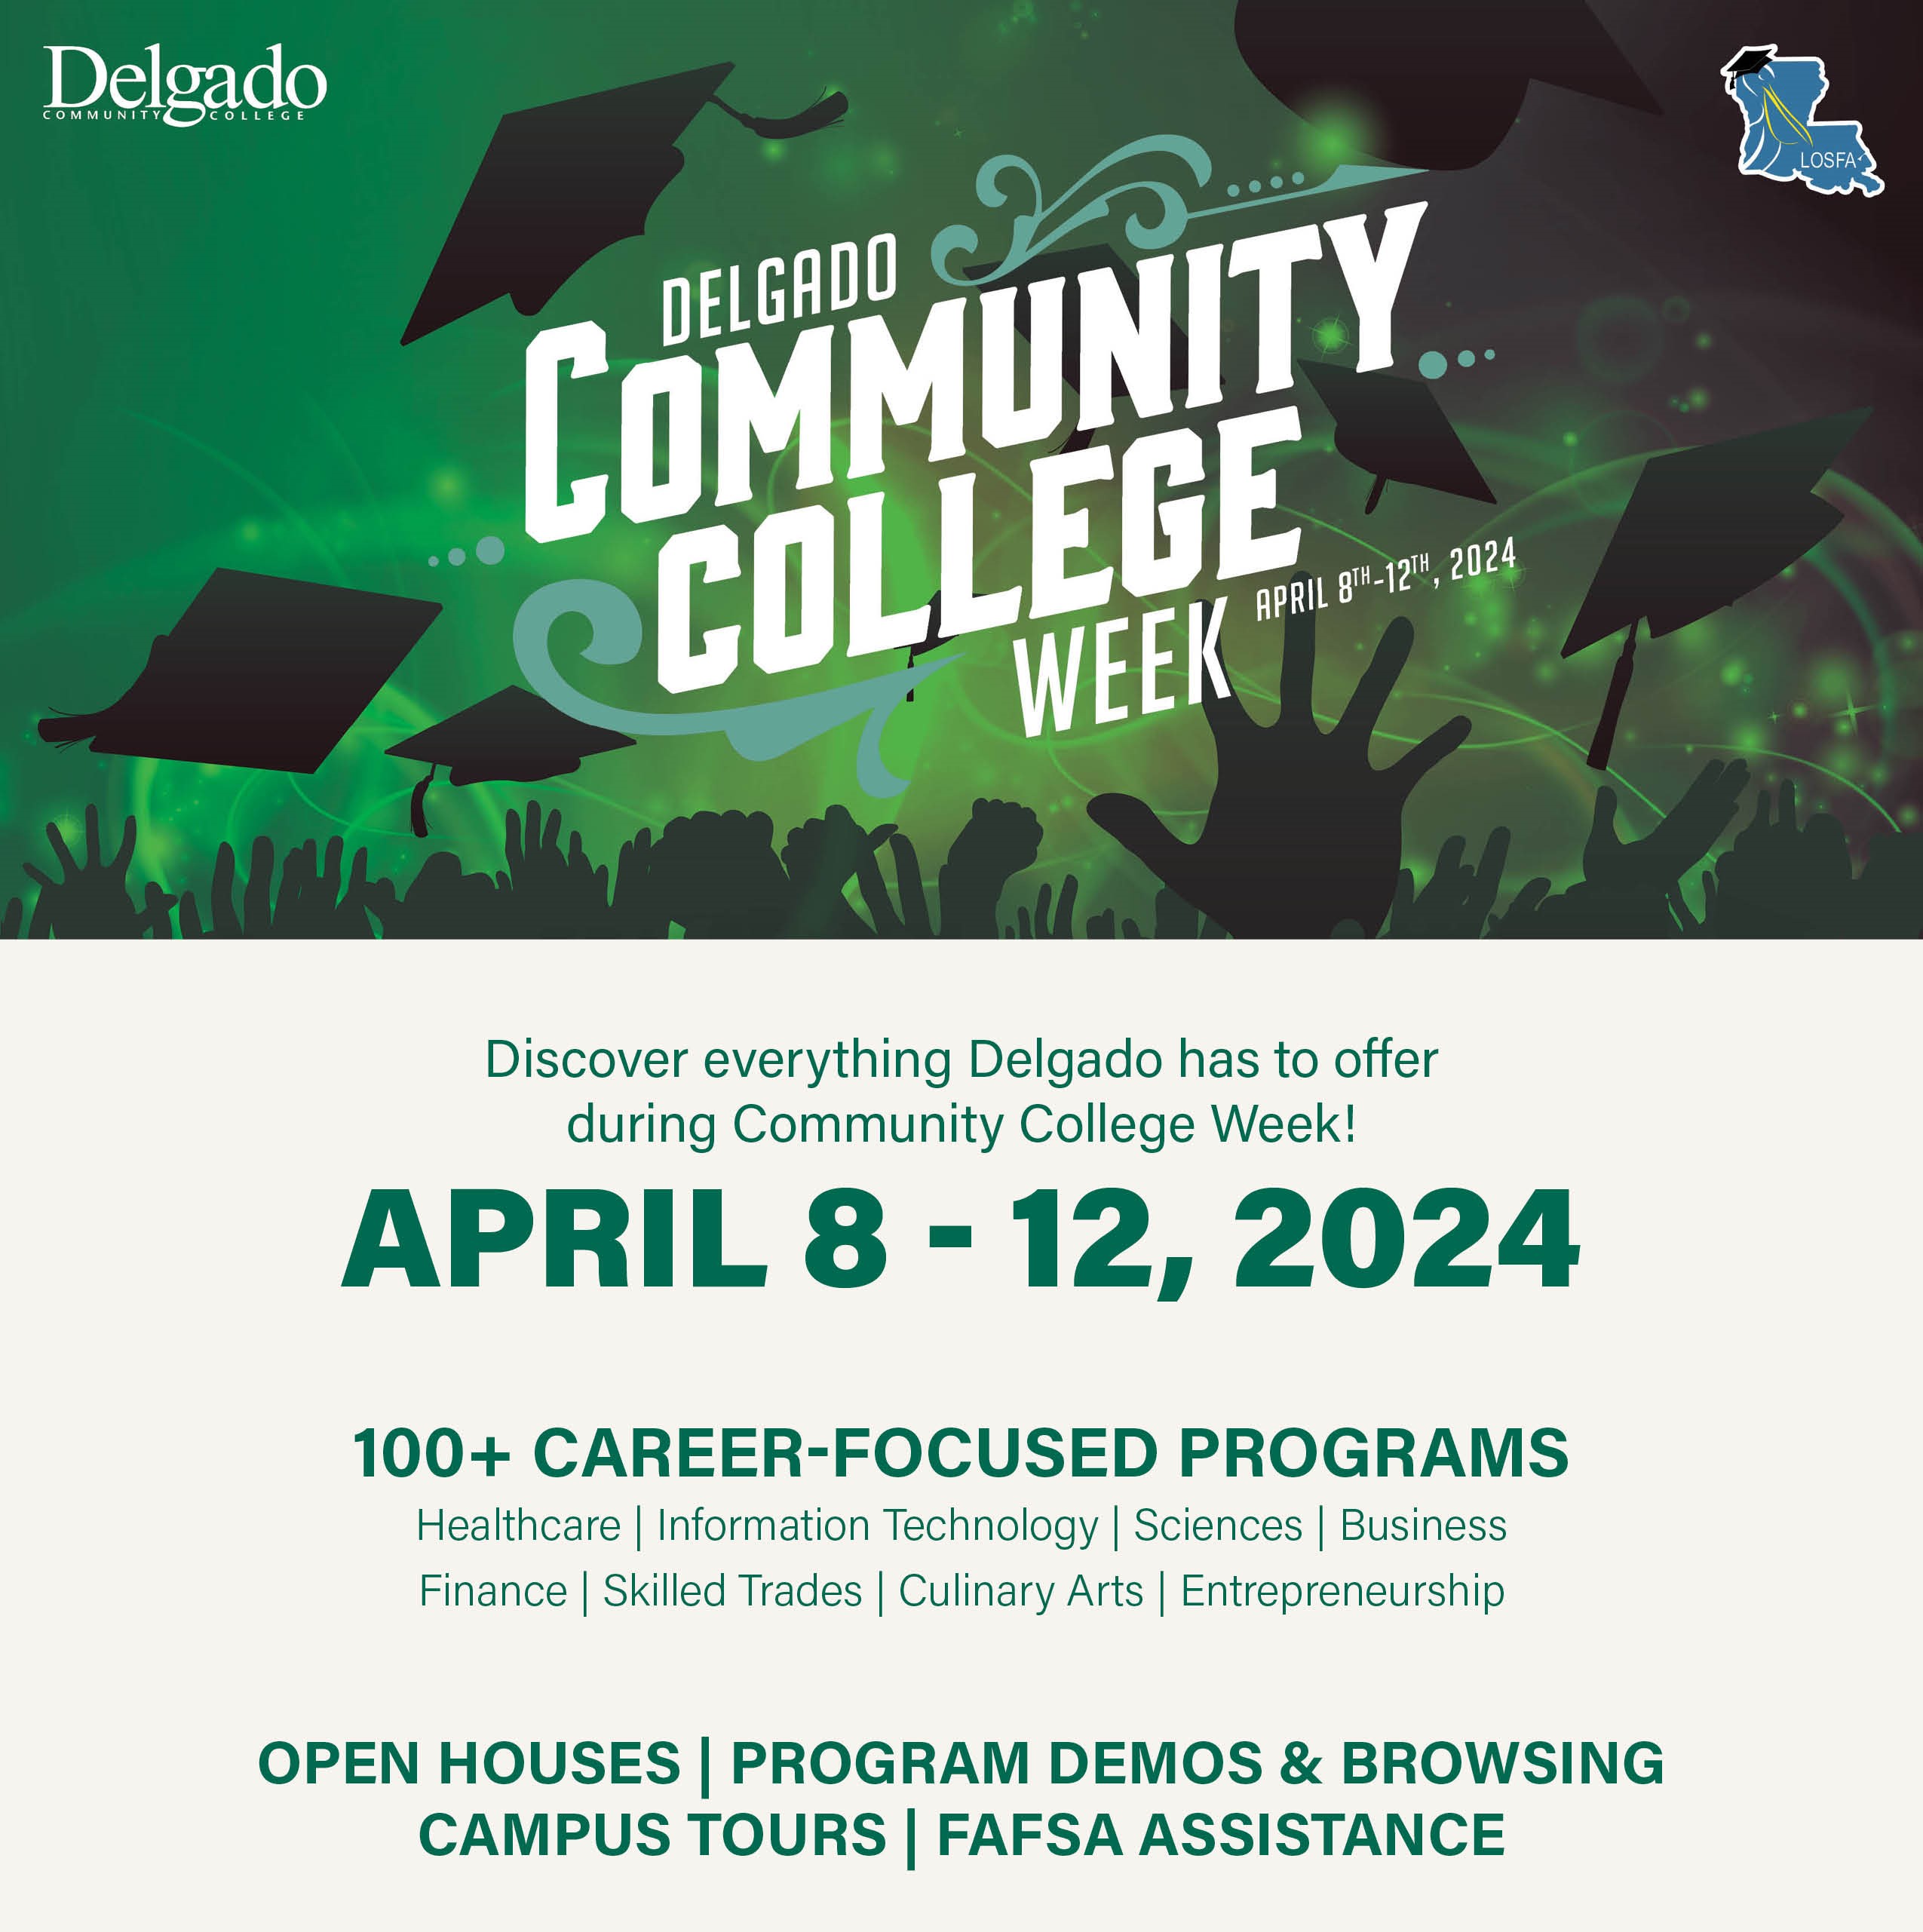 background of green with sillouette hands throwing graduation caps - Delgado Community College Week. Discover everything Delgado has to offer during Community College Week! April 8-12, 2024. 100+ career-focused programs - healthcare, inforamtion technology, sciences, business, finance, skilled trades, culinary arts, entrepreneurship. open houses, program demos & browsing, campus tours, FAFSA assistance